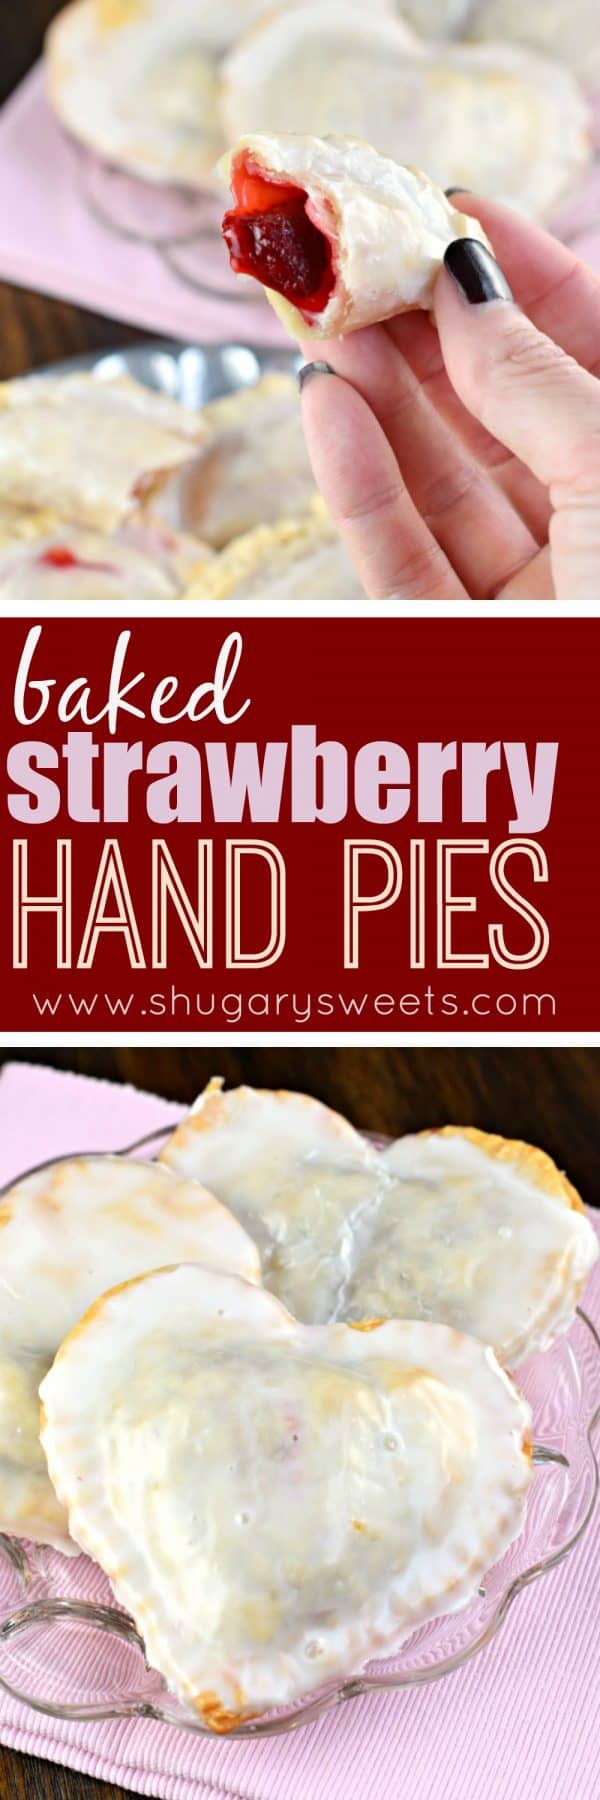 These Strawberry Hand Pies are the perfect dessert. And in about 30 minutes, you’ll have one of these delicious baked treats in your hands! Great for Valentine's Day too!